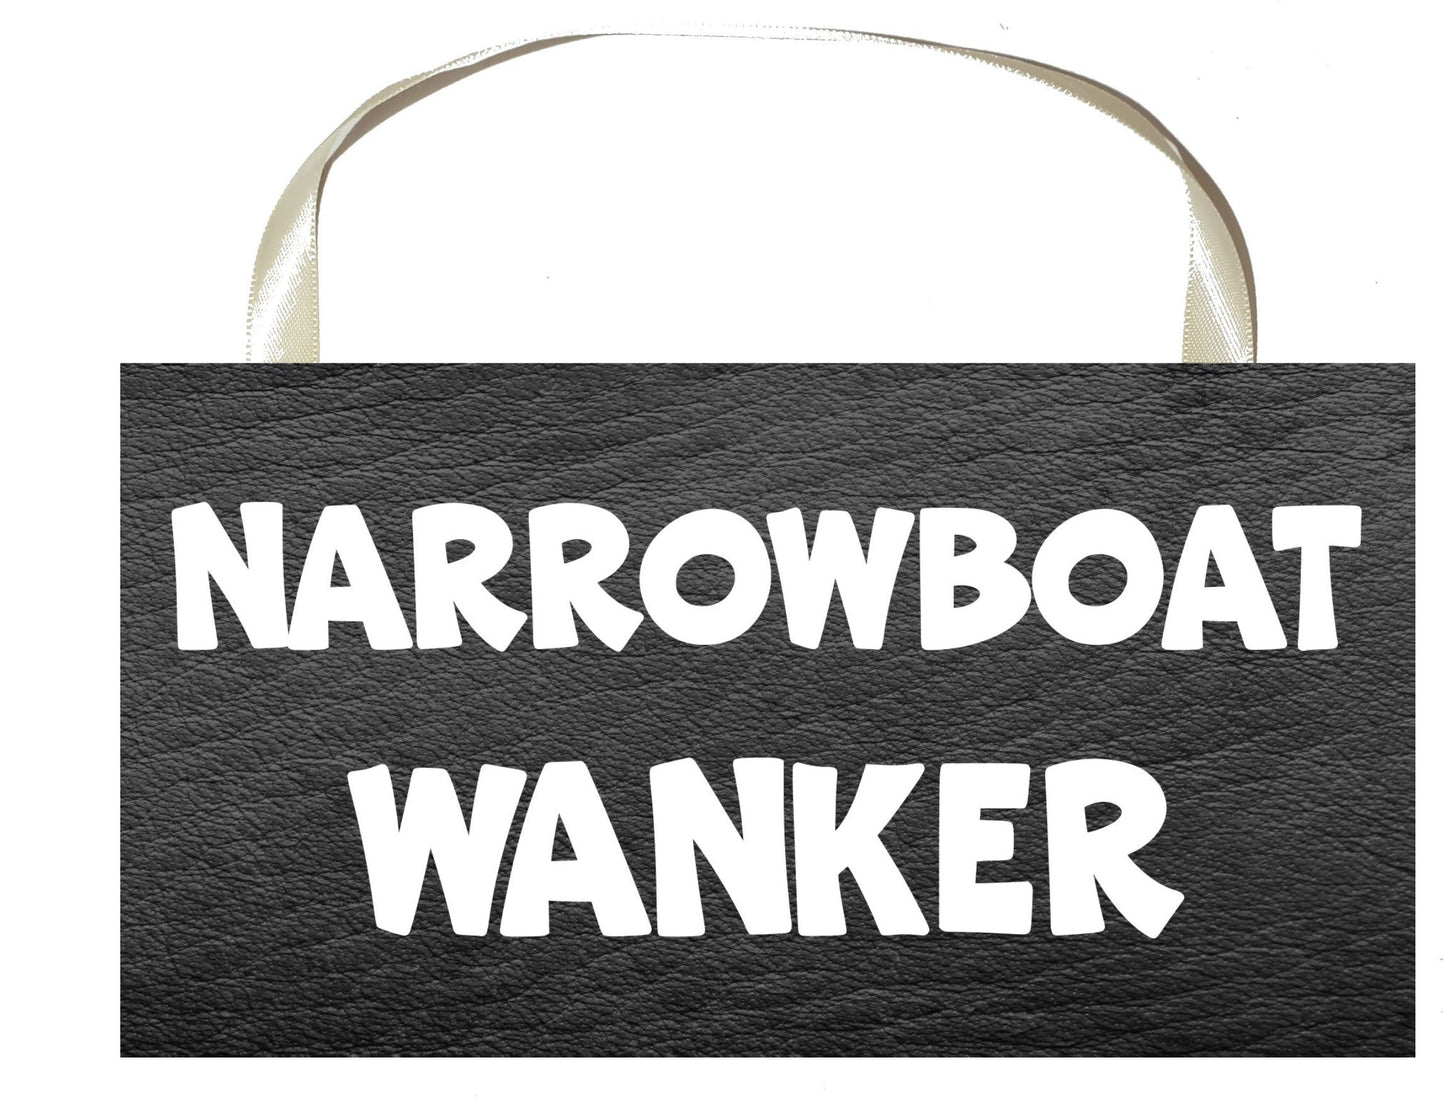 Boating Plaque / Sign Gift - Narrowboat Wanker - Rude Cheeky Cute Fun Novelty Present